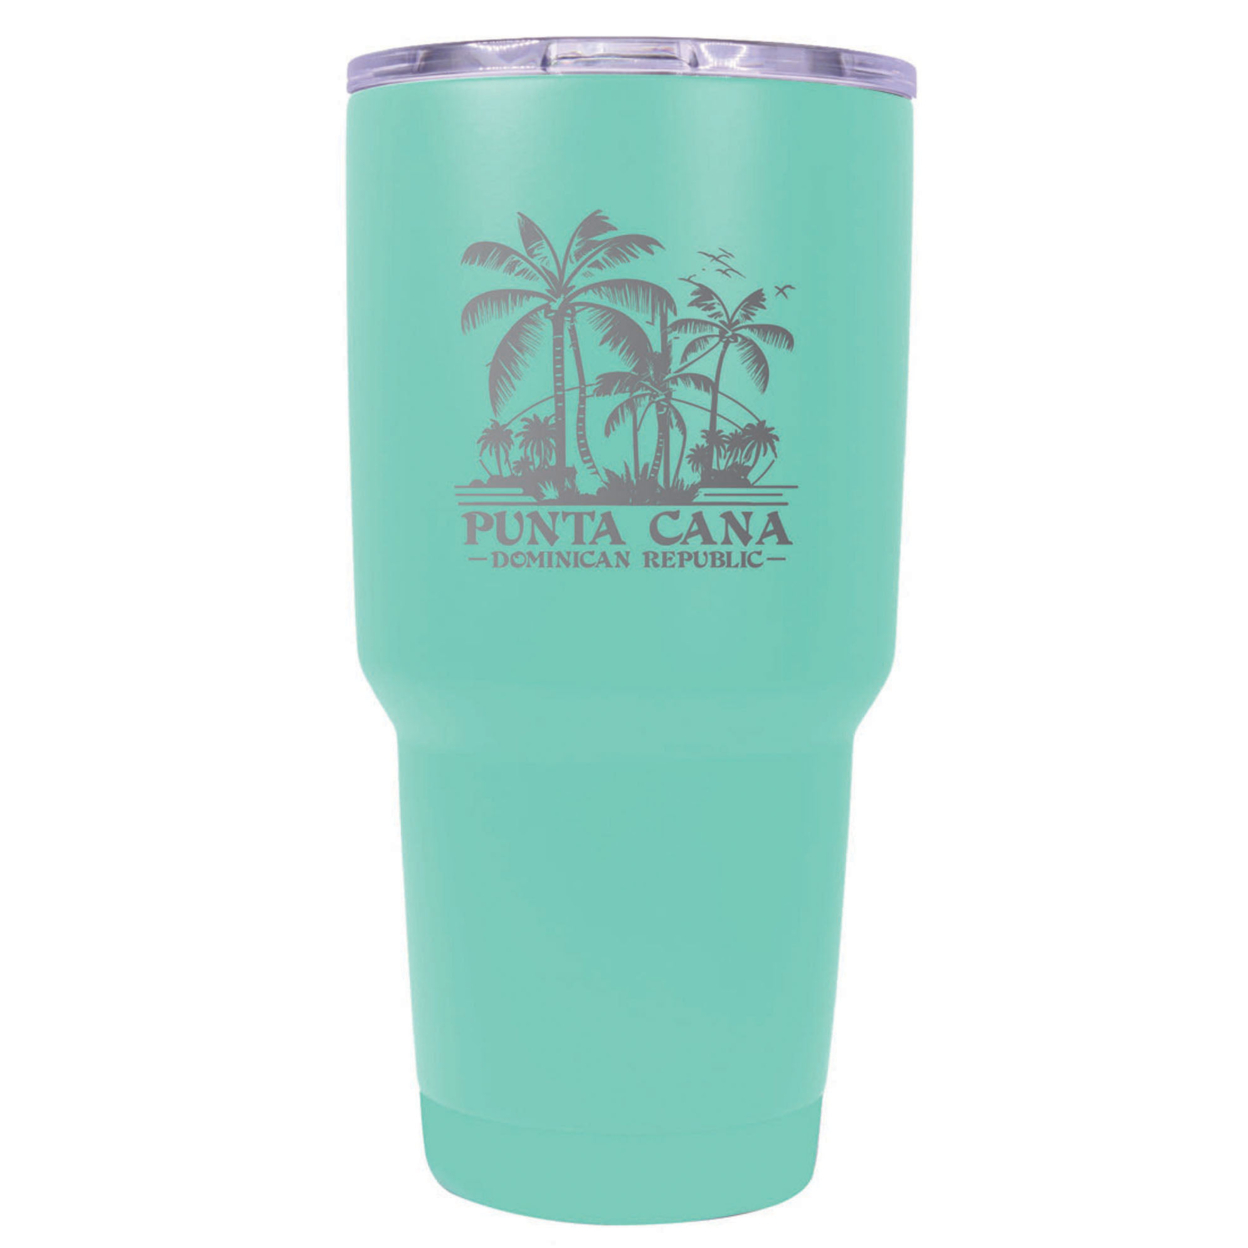 Punta Cana Dominican Republic Souvenir 24 Oz Insulated Stainless Steel Tumbler Etched - Seafoam, PALMS